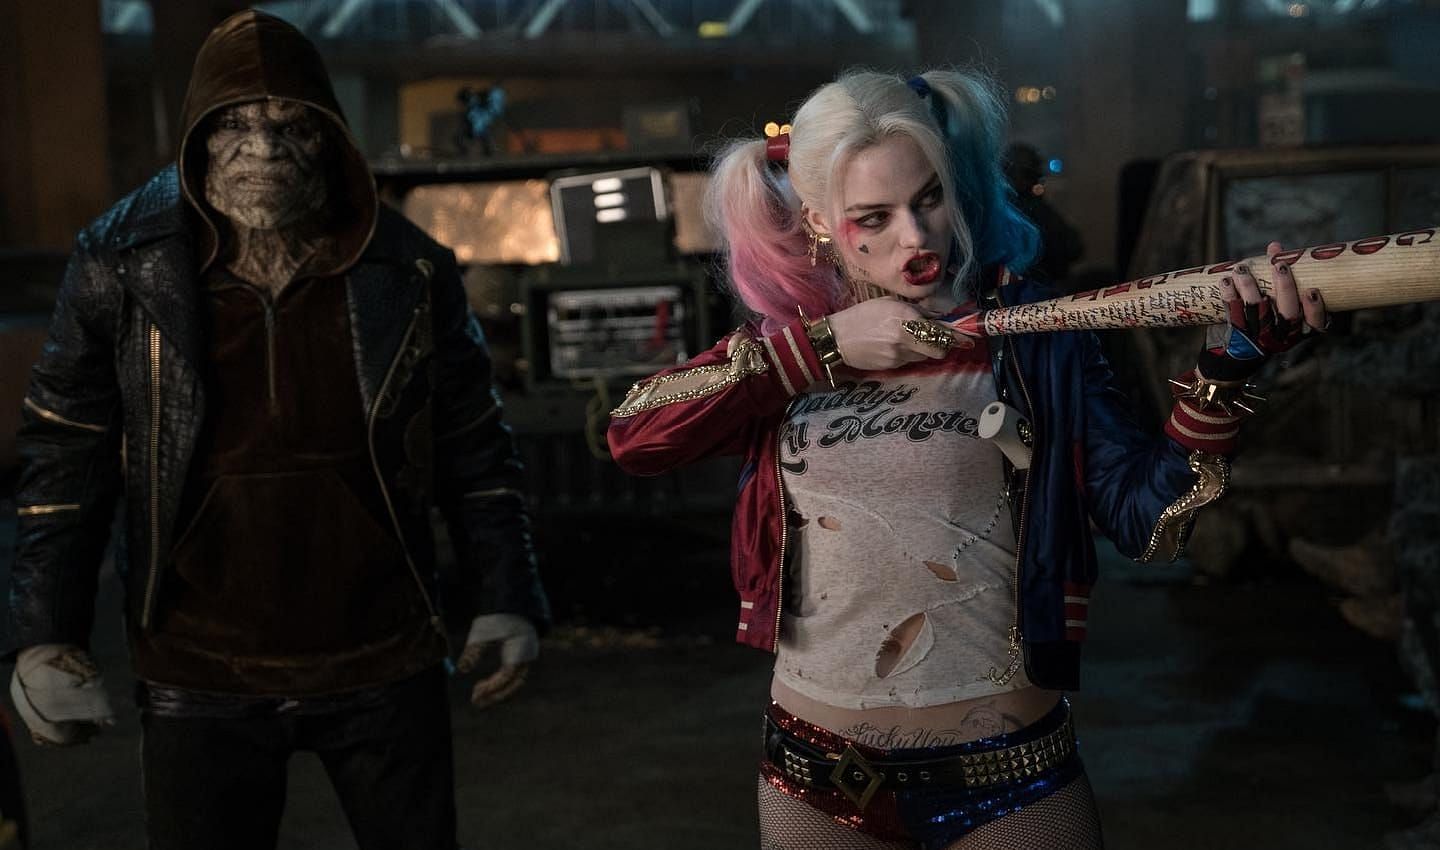 Why is Margot Robbie not playing Harley Quinn?